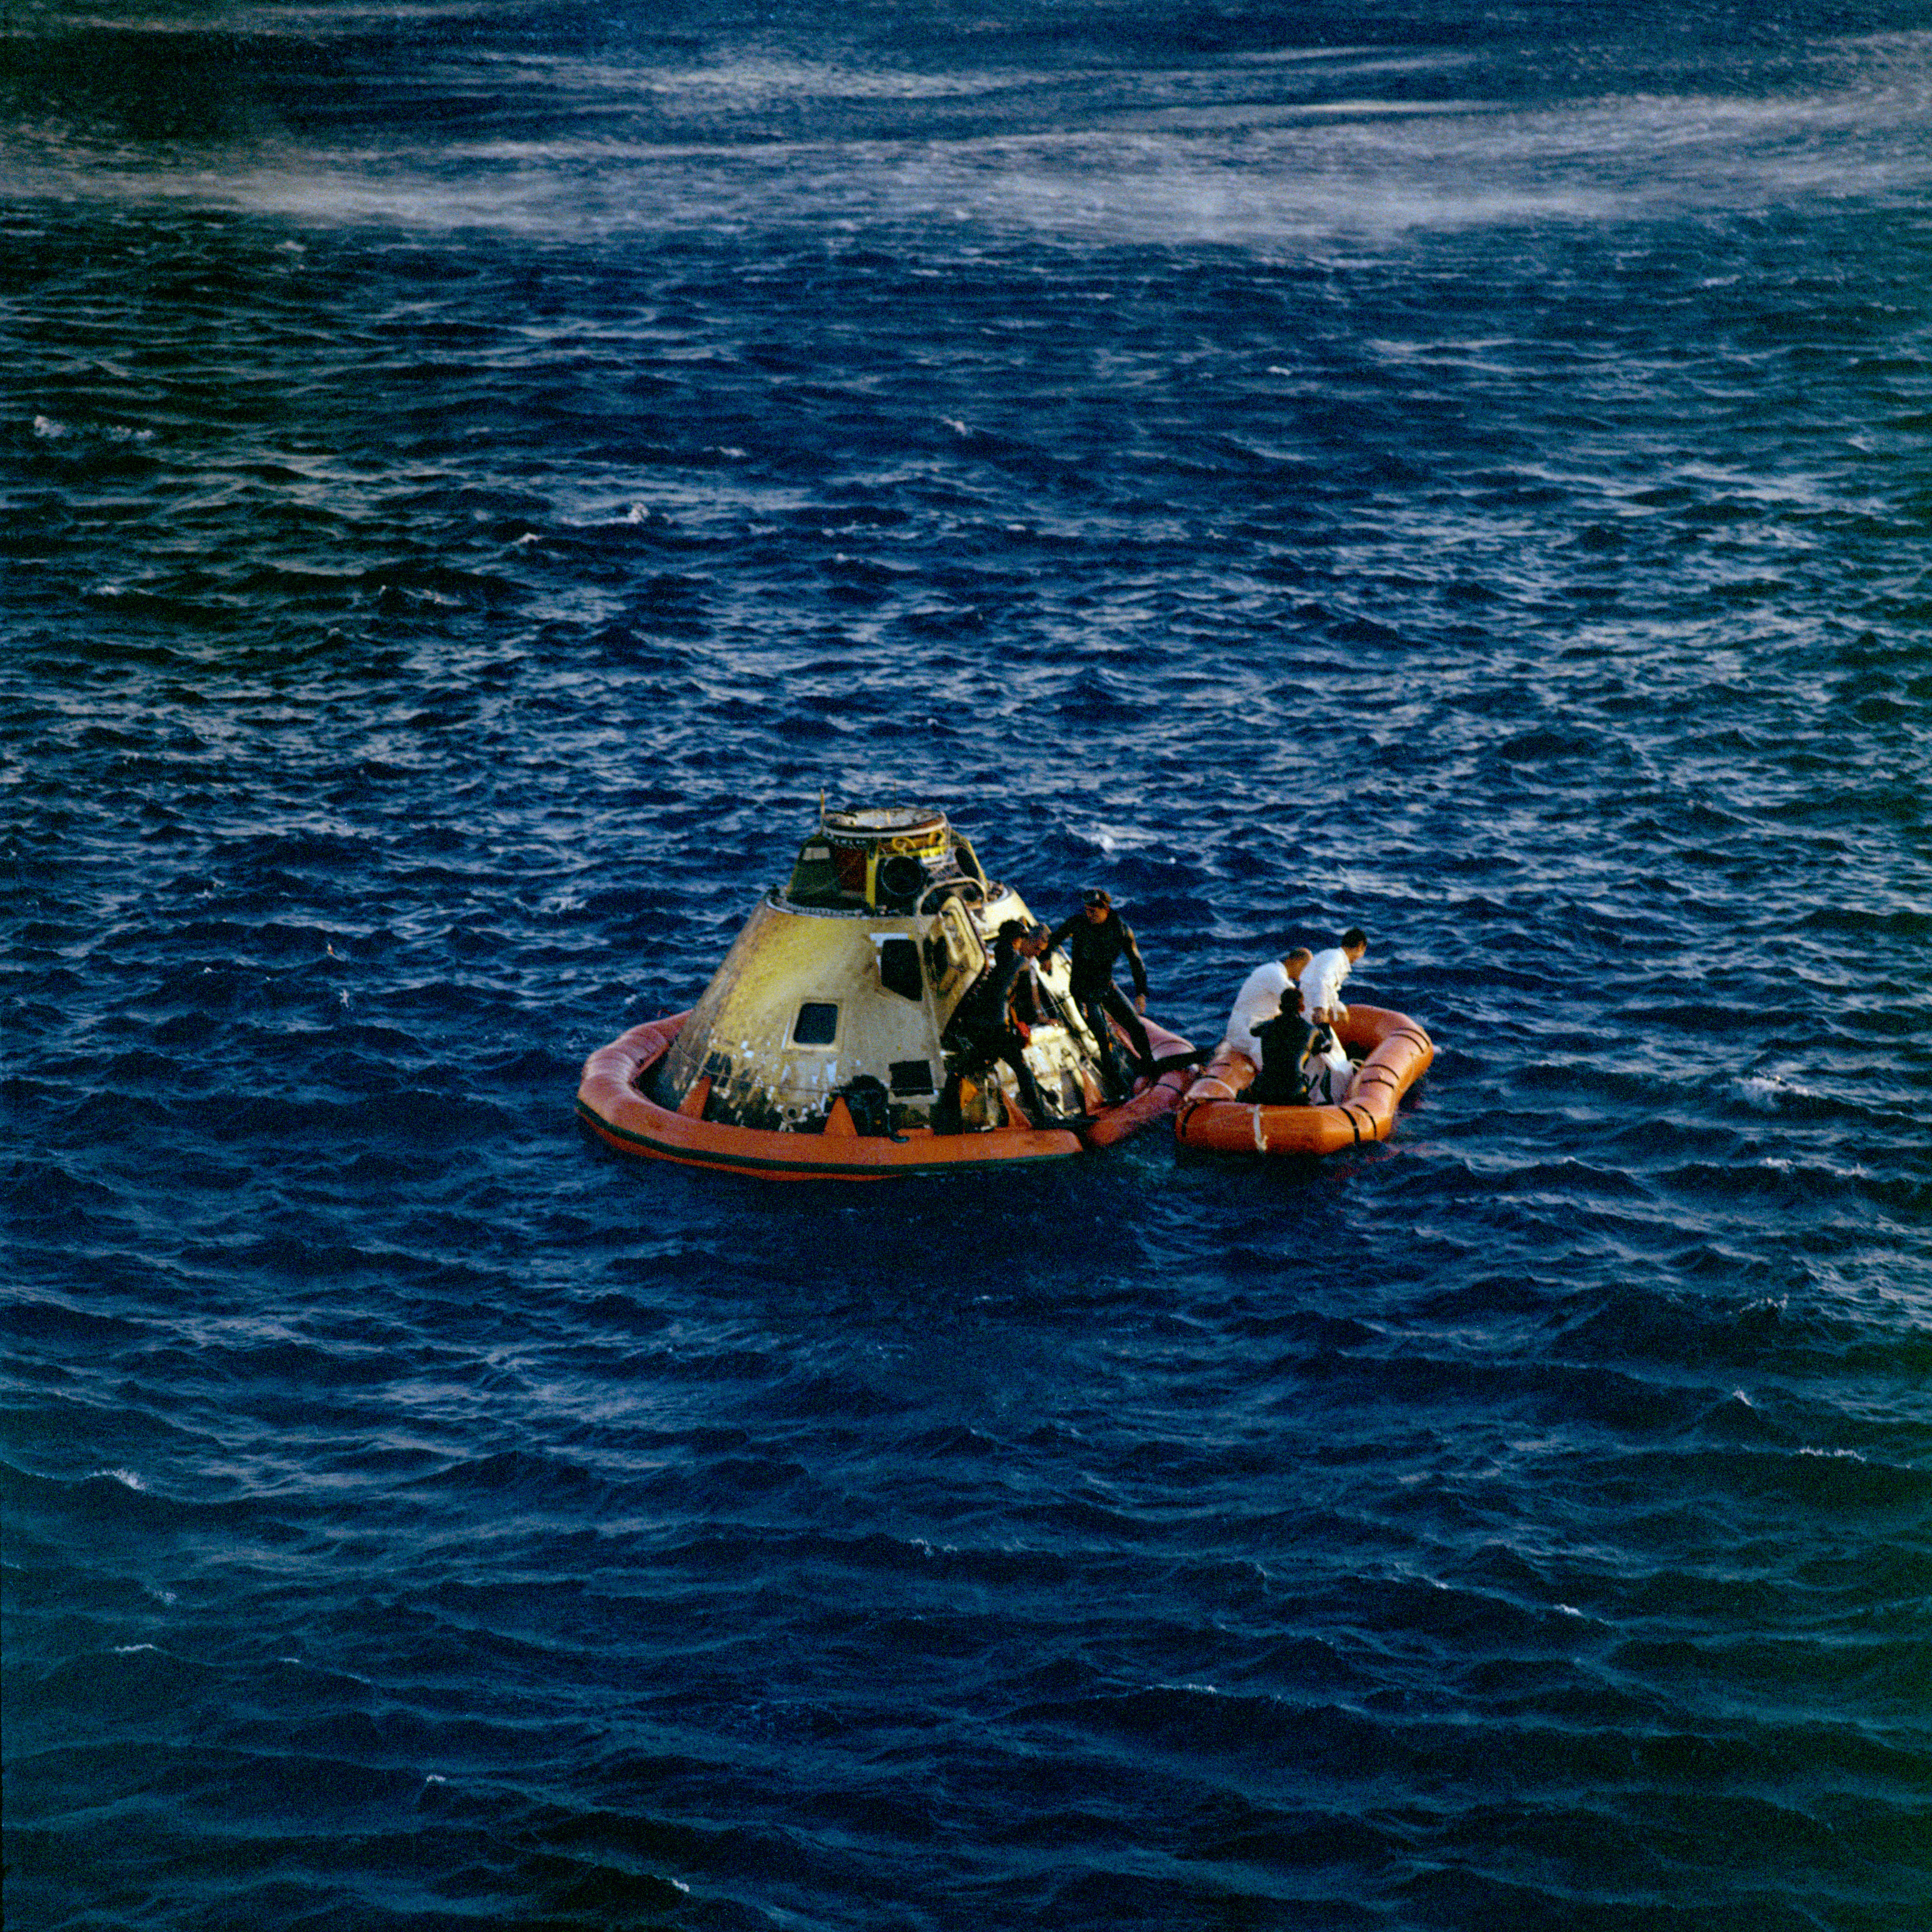 In the middle of a deep blue ocean, choppy with small waves, are two rafts. On the left is a larger orange raft that surrounds the Apollo 10 spacecraft. The spacecraft is a rounded pyramid shape and is painted white. Two men in black wetsuits look on as astronaut Eugene A. Cernan emerges from the spacecraft. Two other astronauts dressed in white are already on the smaller orange raft on the right, along with another person in a black wetsuit.